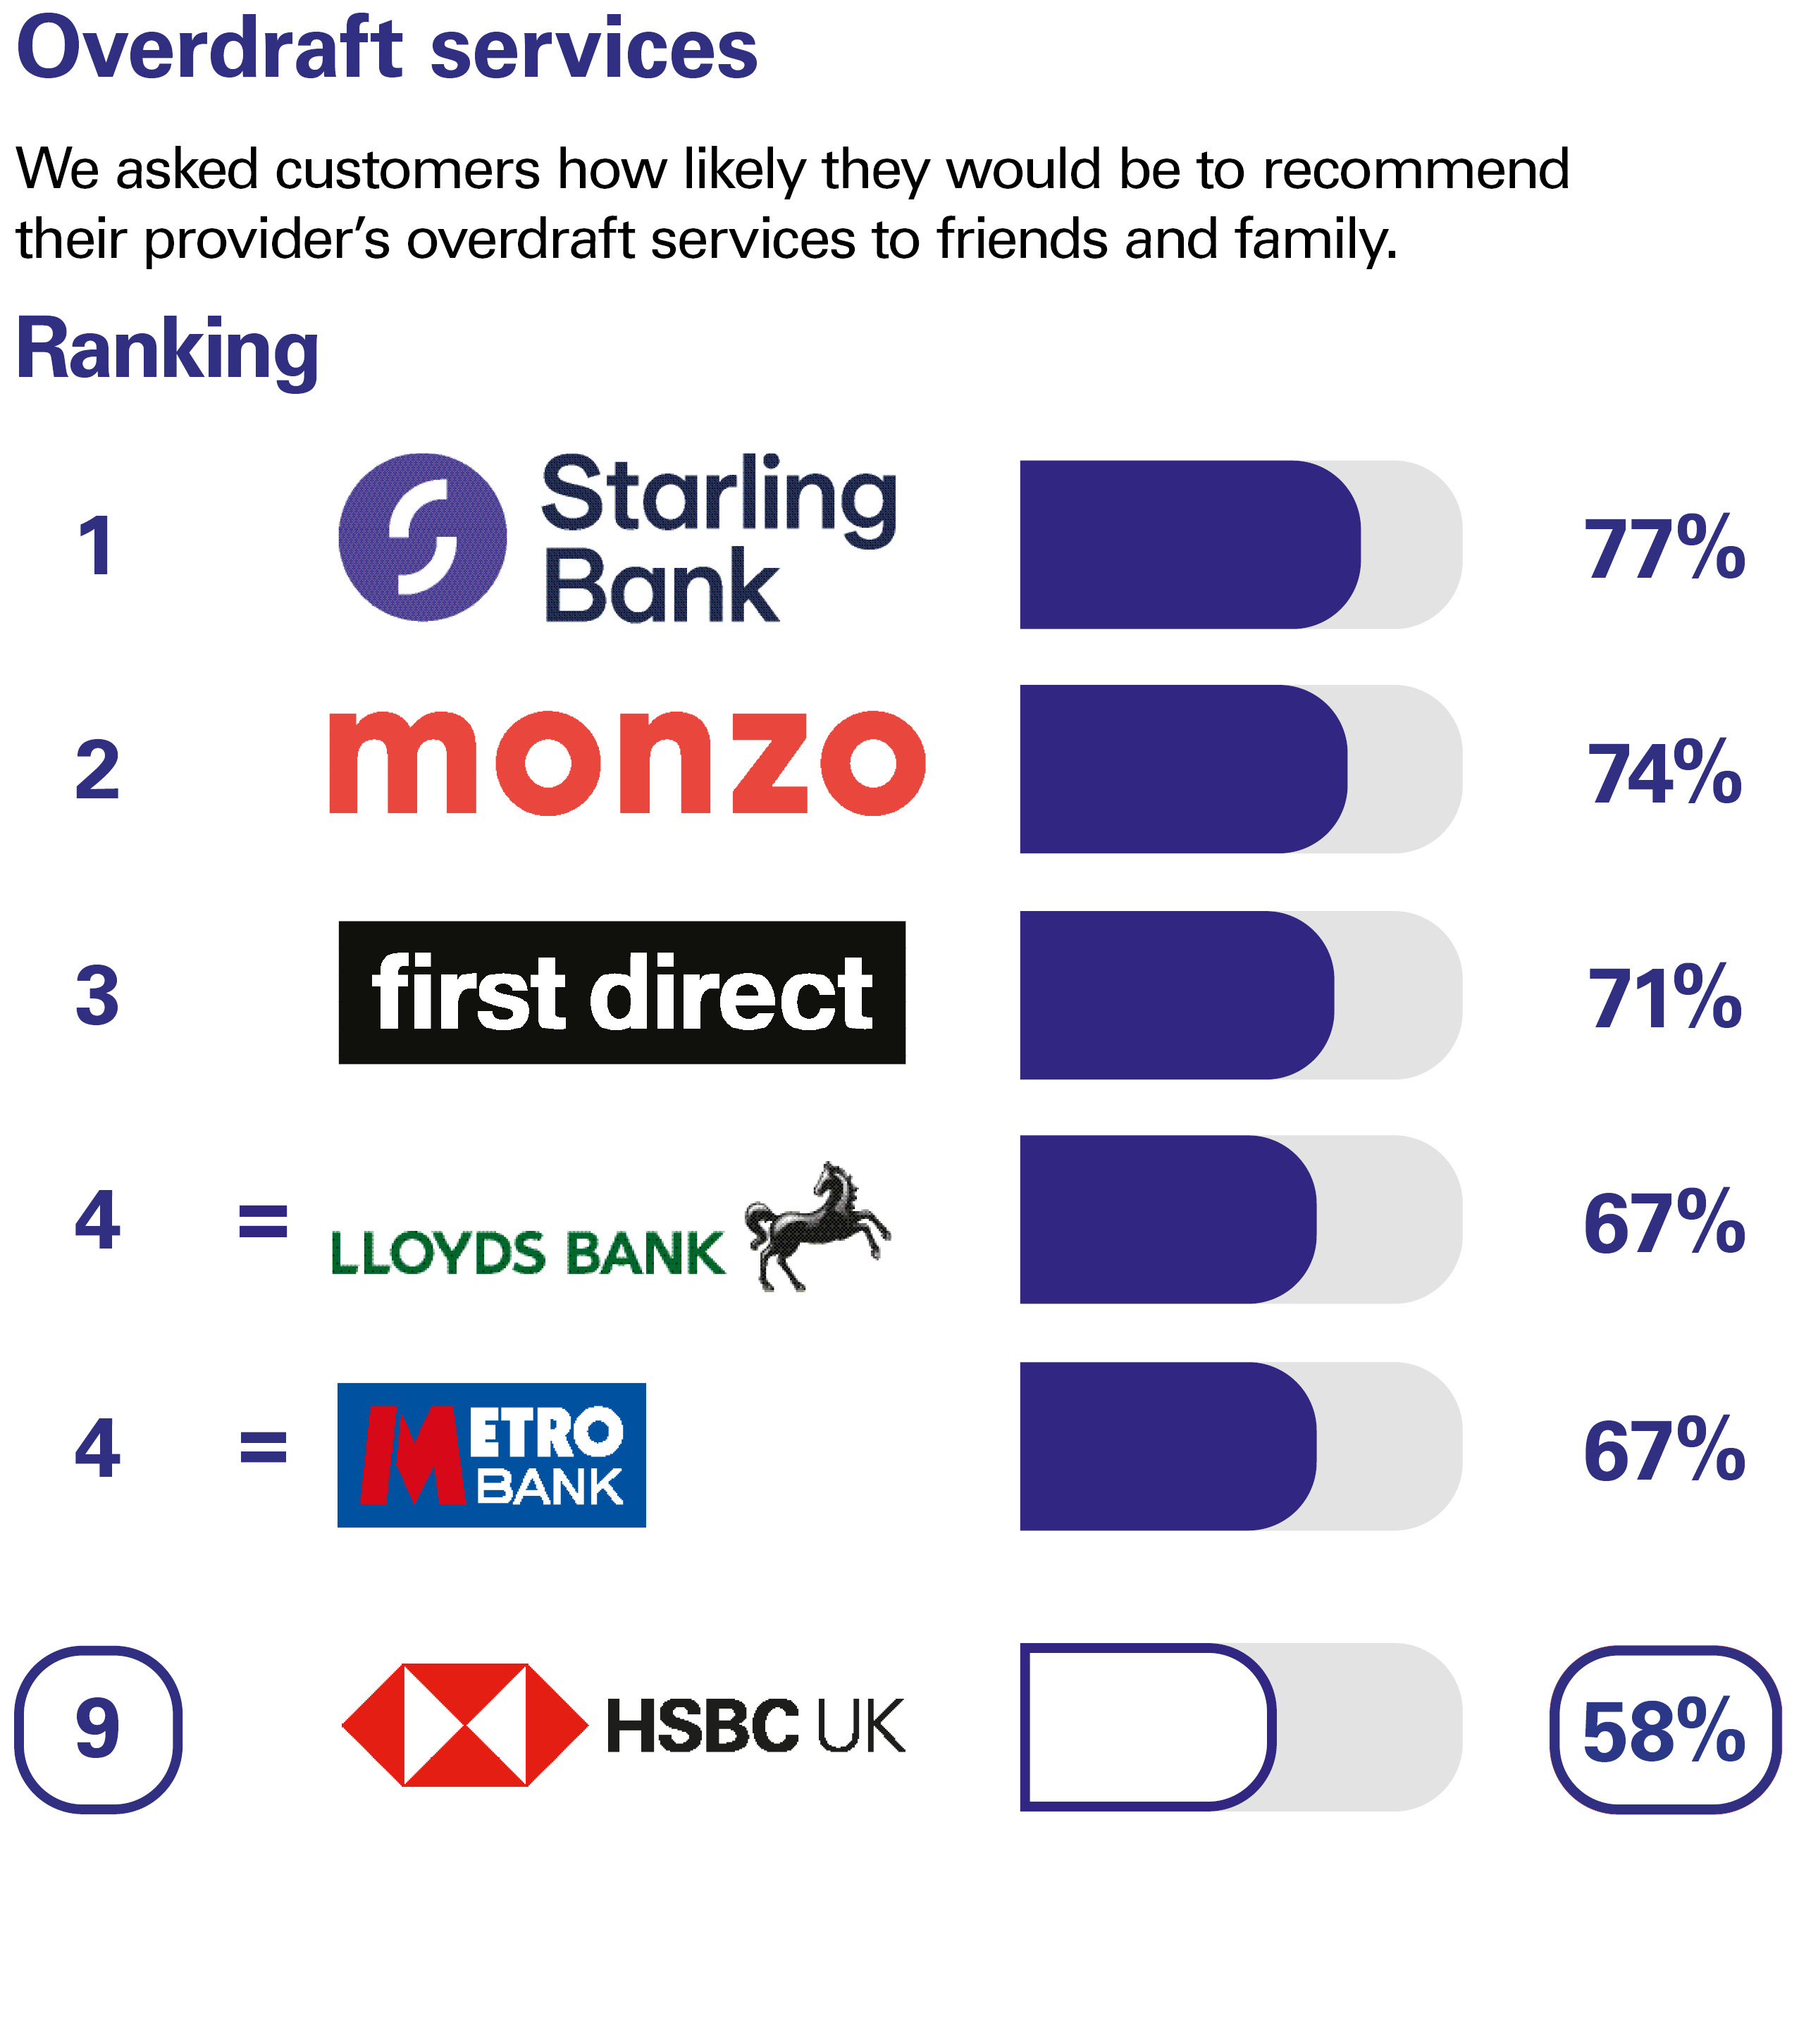 Overdraft services. We asked customers how likely they would be to recommend their provider’s overdraft services to friends and family. Ranking: 1 Starling Bank 77% 2 Monzo 74% 3 first direct 71% equal 4 Lloyds Bank 67% equal 4 Metro Bank 67% 9 HSBC UK 58%